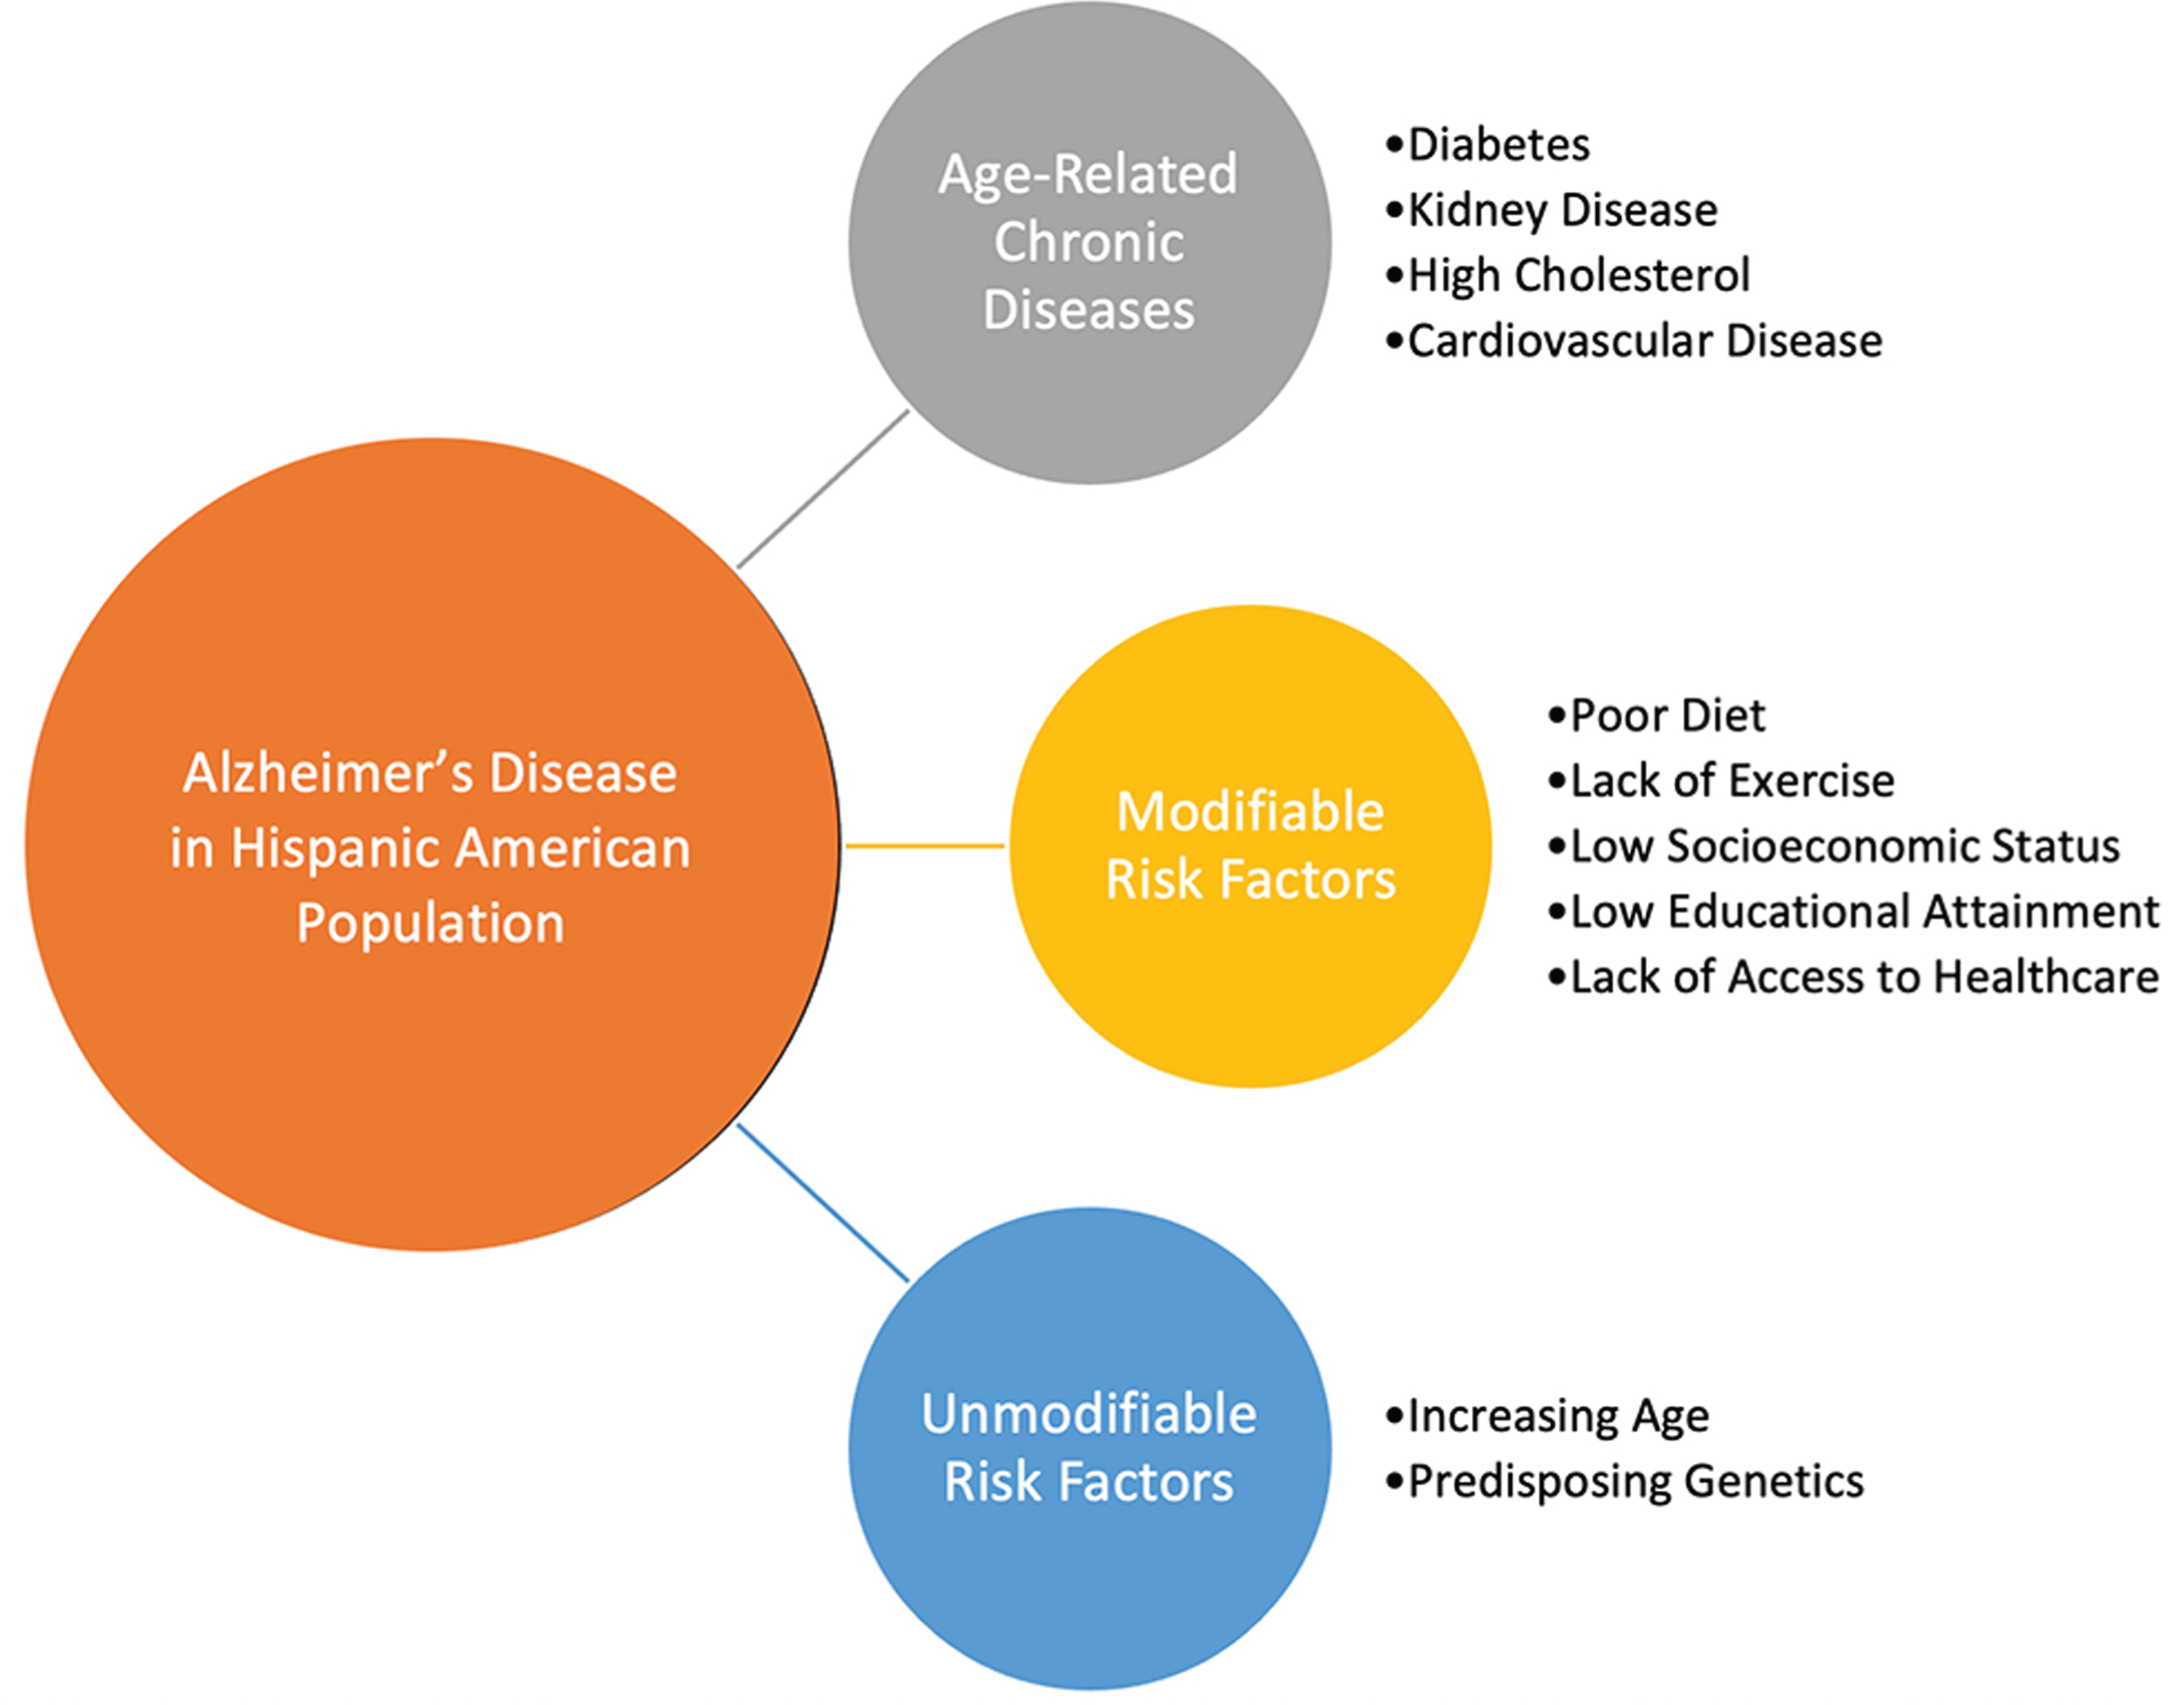 Summary of the Disadvantages Faced by Hispanic Americans in Overcoming the Burden of Alzheimer’s Disease.